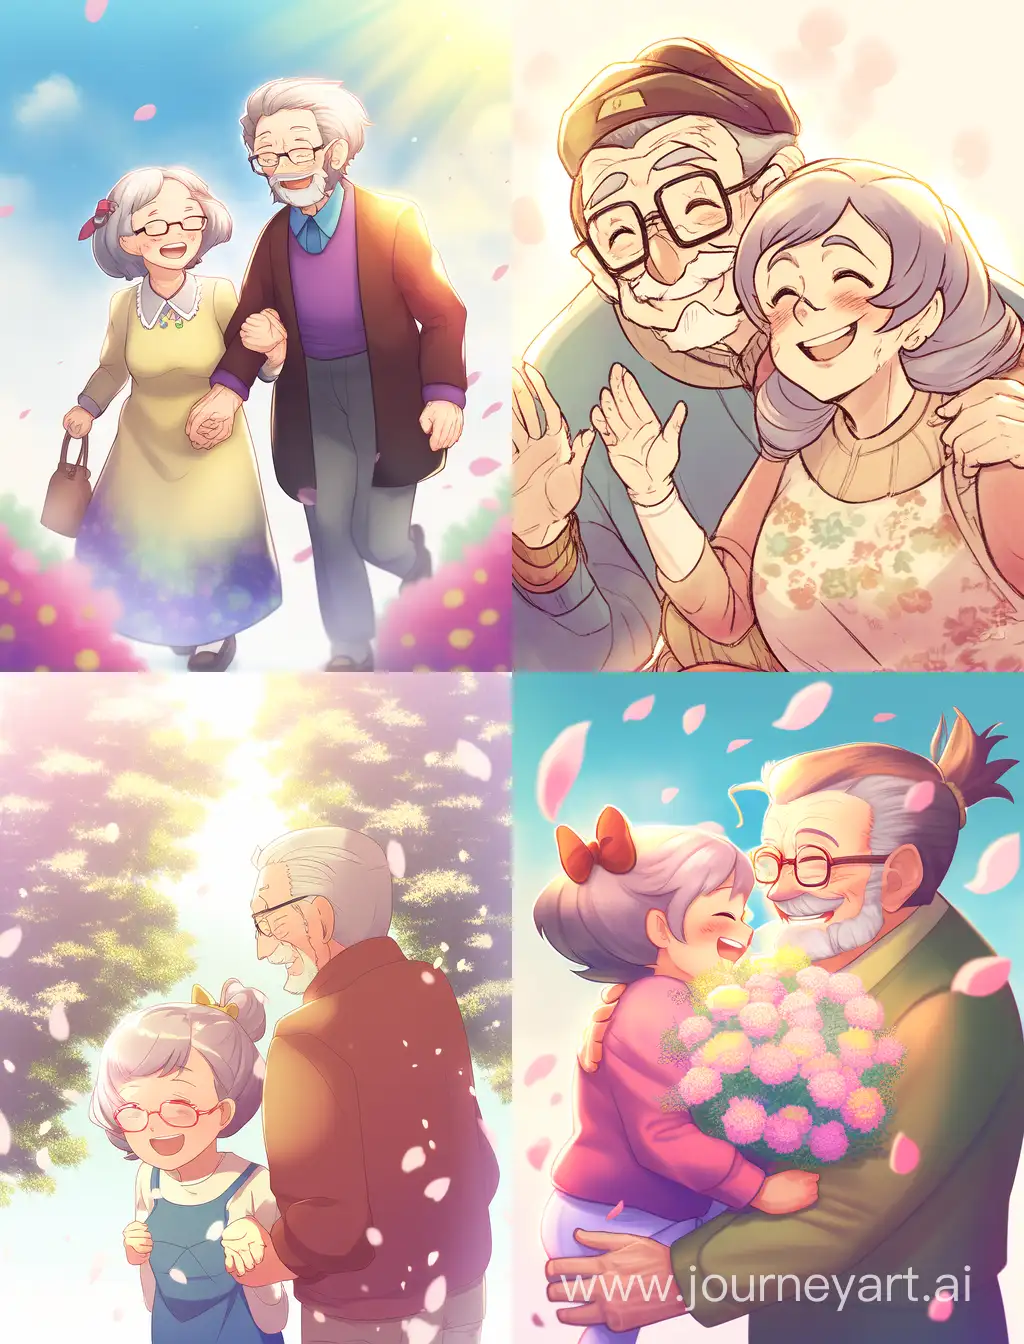 End-of-the-World-Grandparents-Love-Amidst-Apocalypse